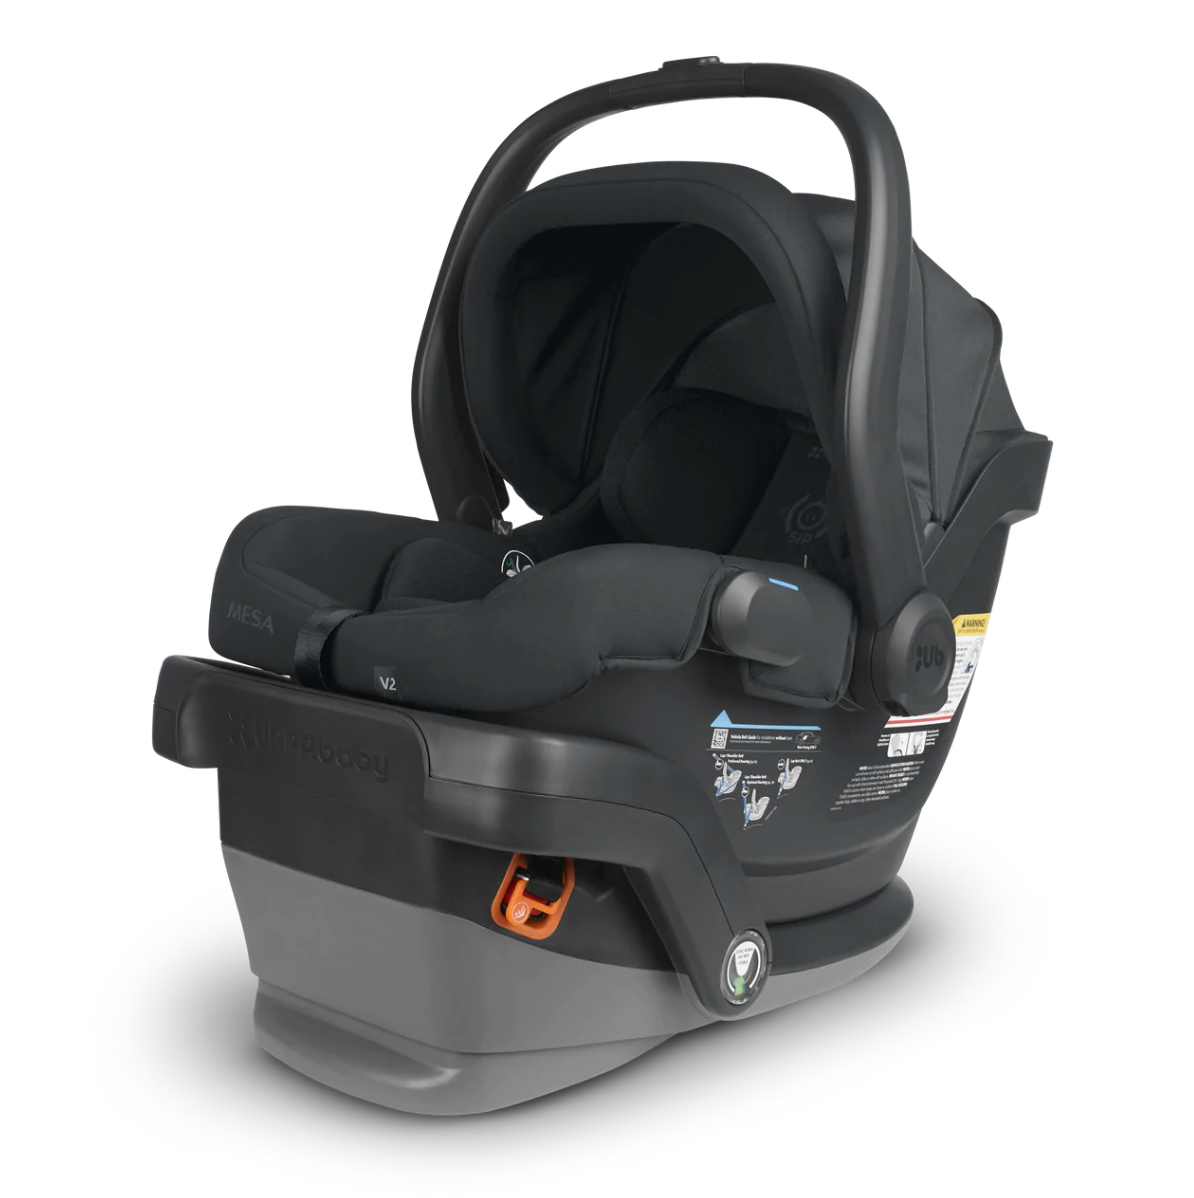 Infant Car Seats - Buying Guide - Waverley Toyota